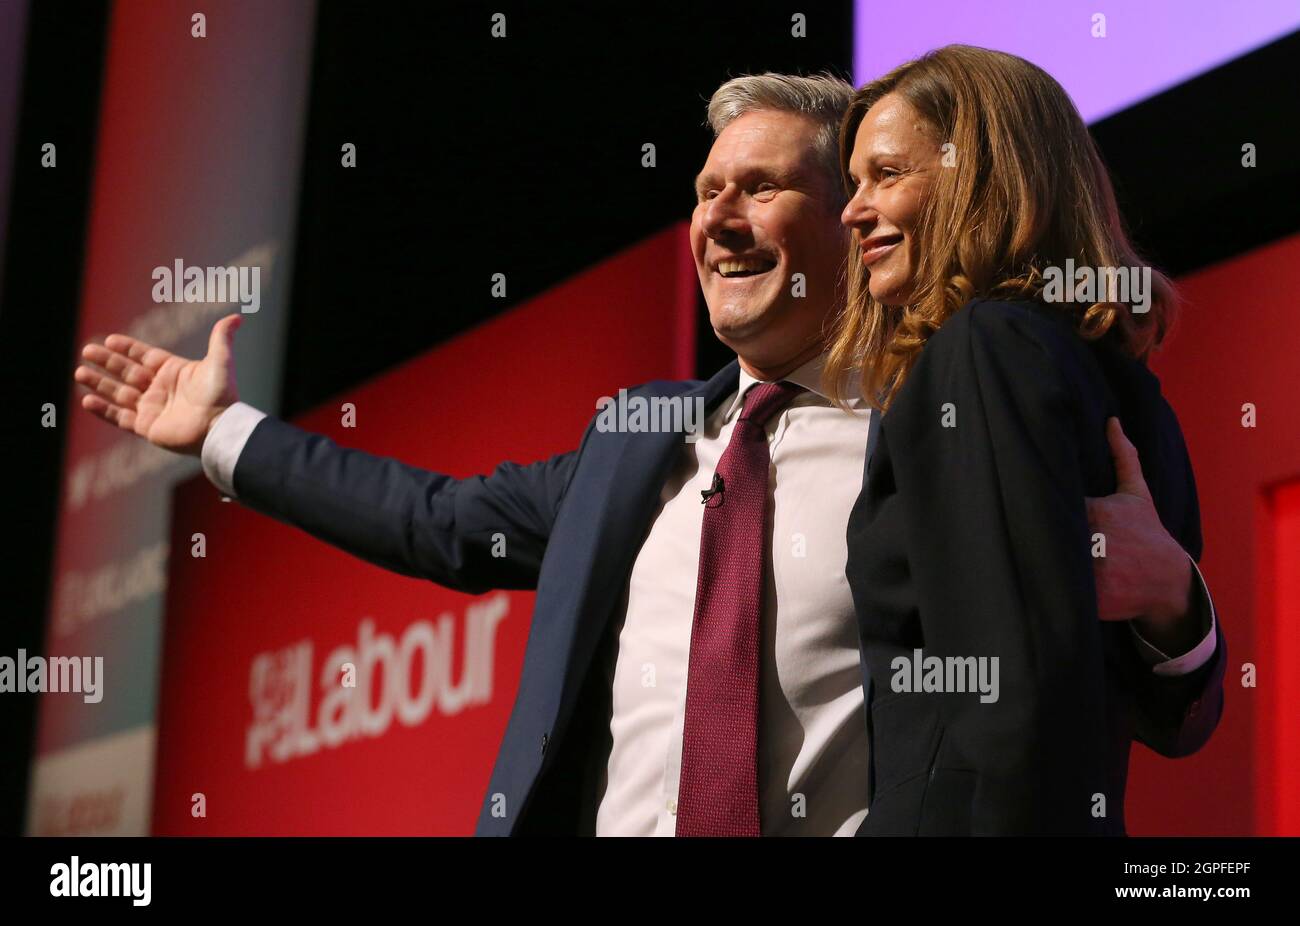 KEIR STARMER, VICTORIA STARMER, 2021 Banque D'Images